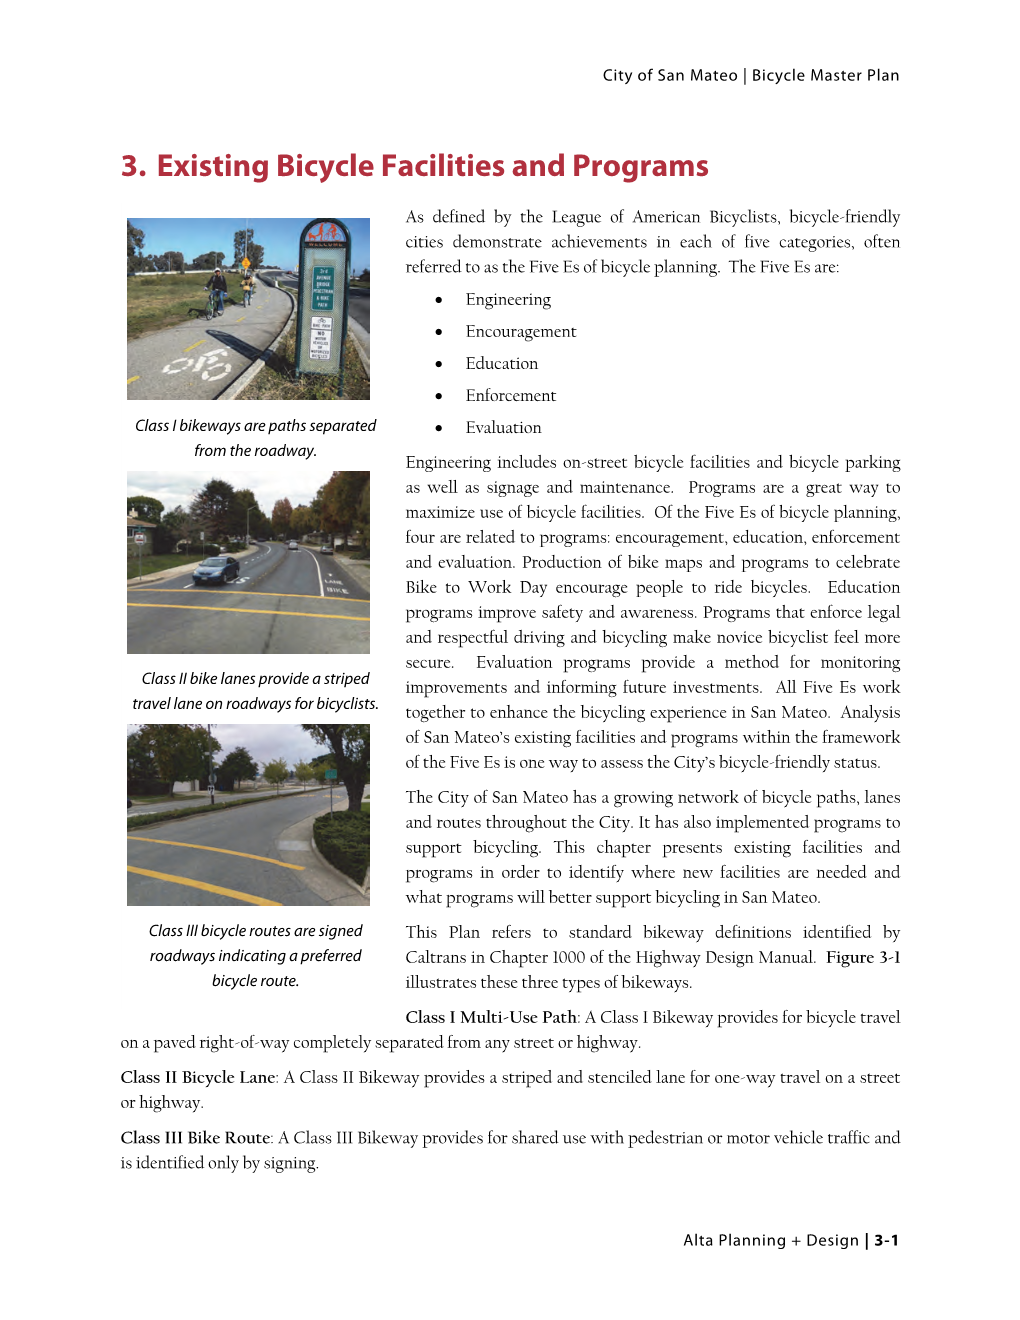 3. Existing Bicycle Facilities and Programs